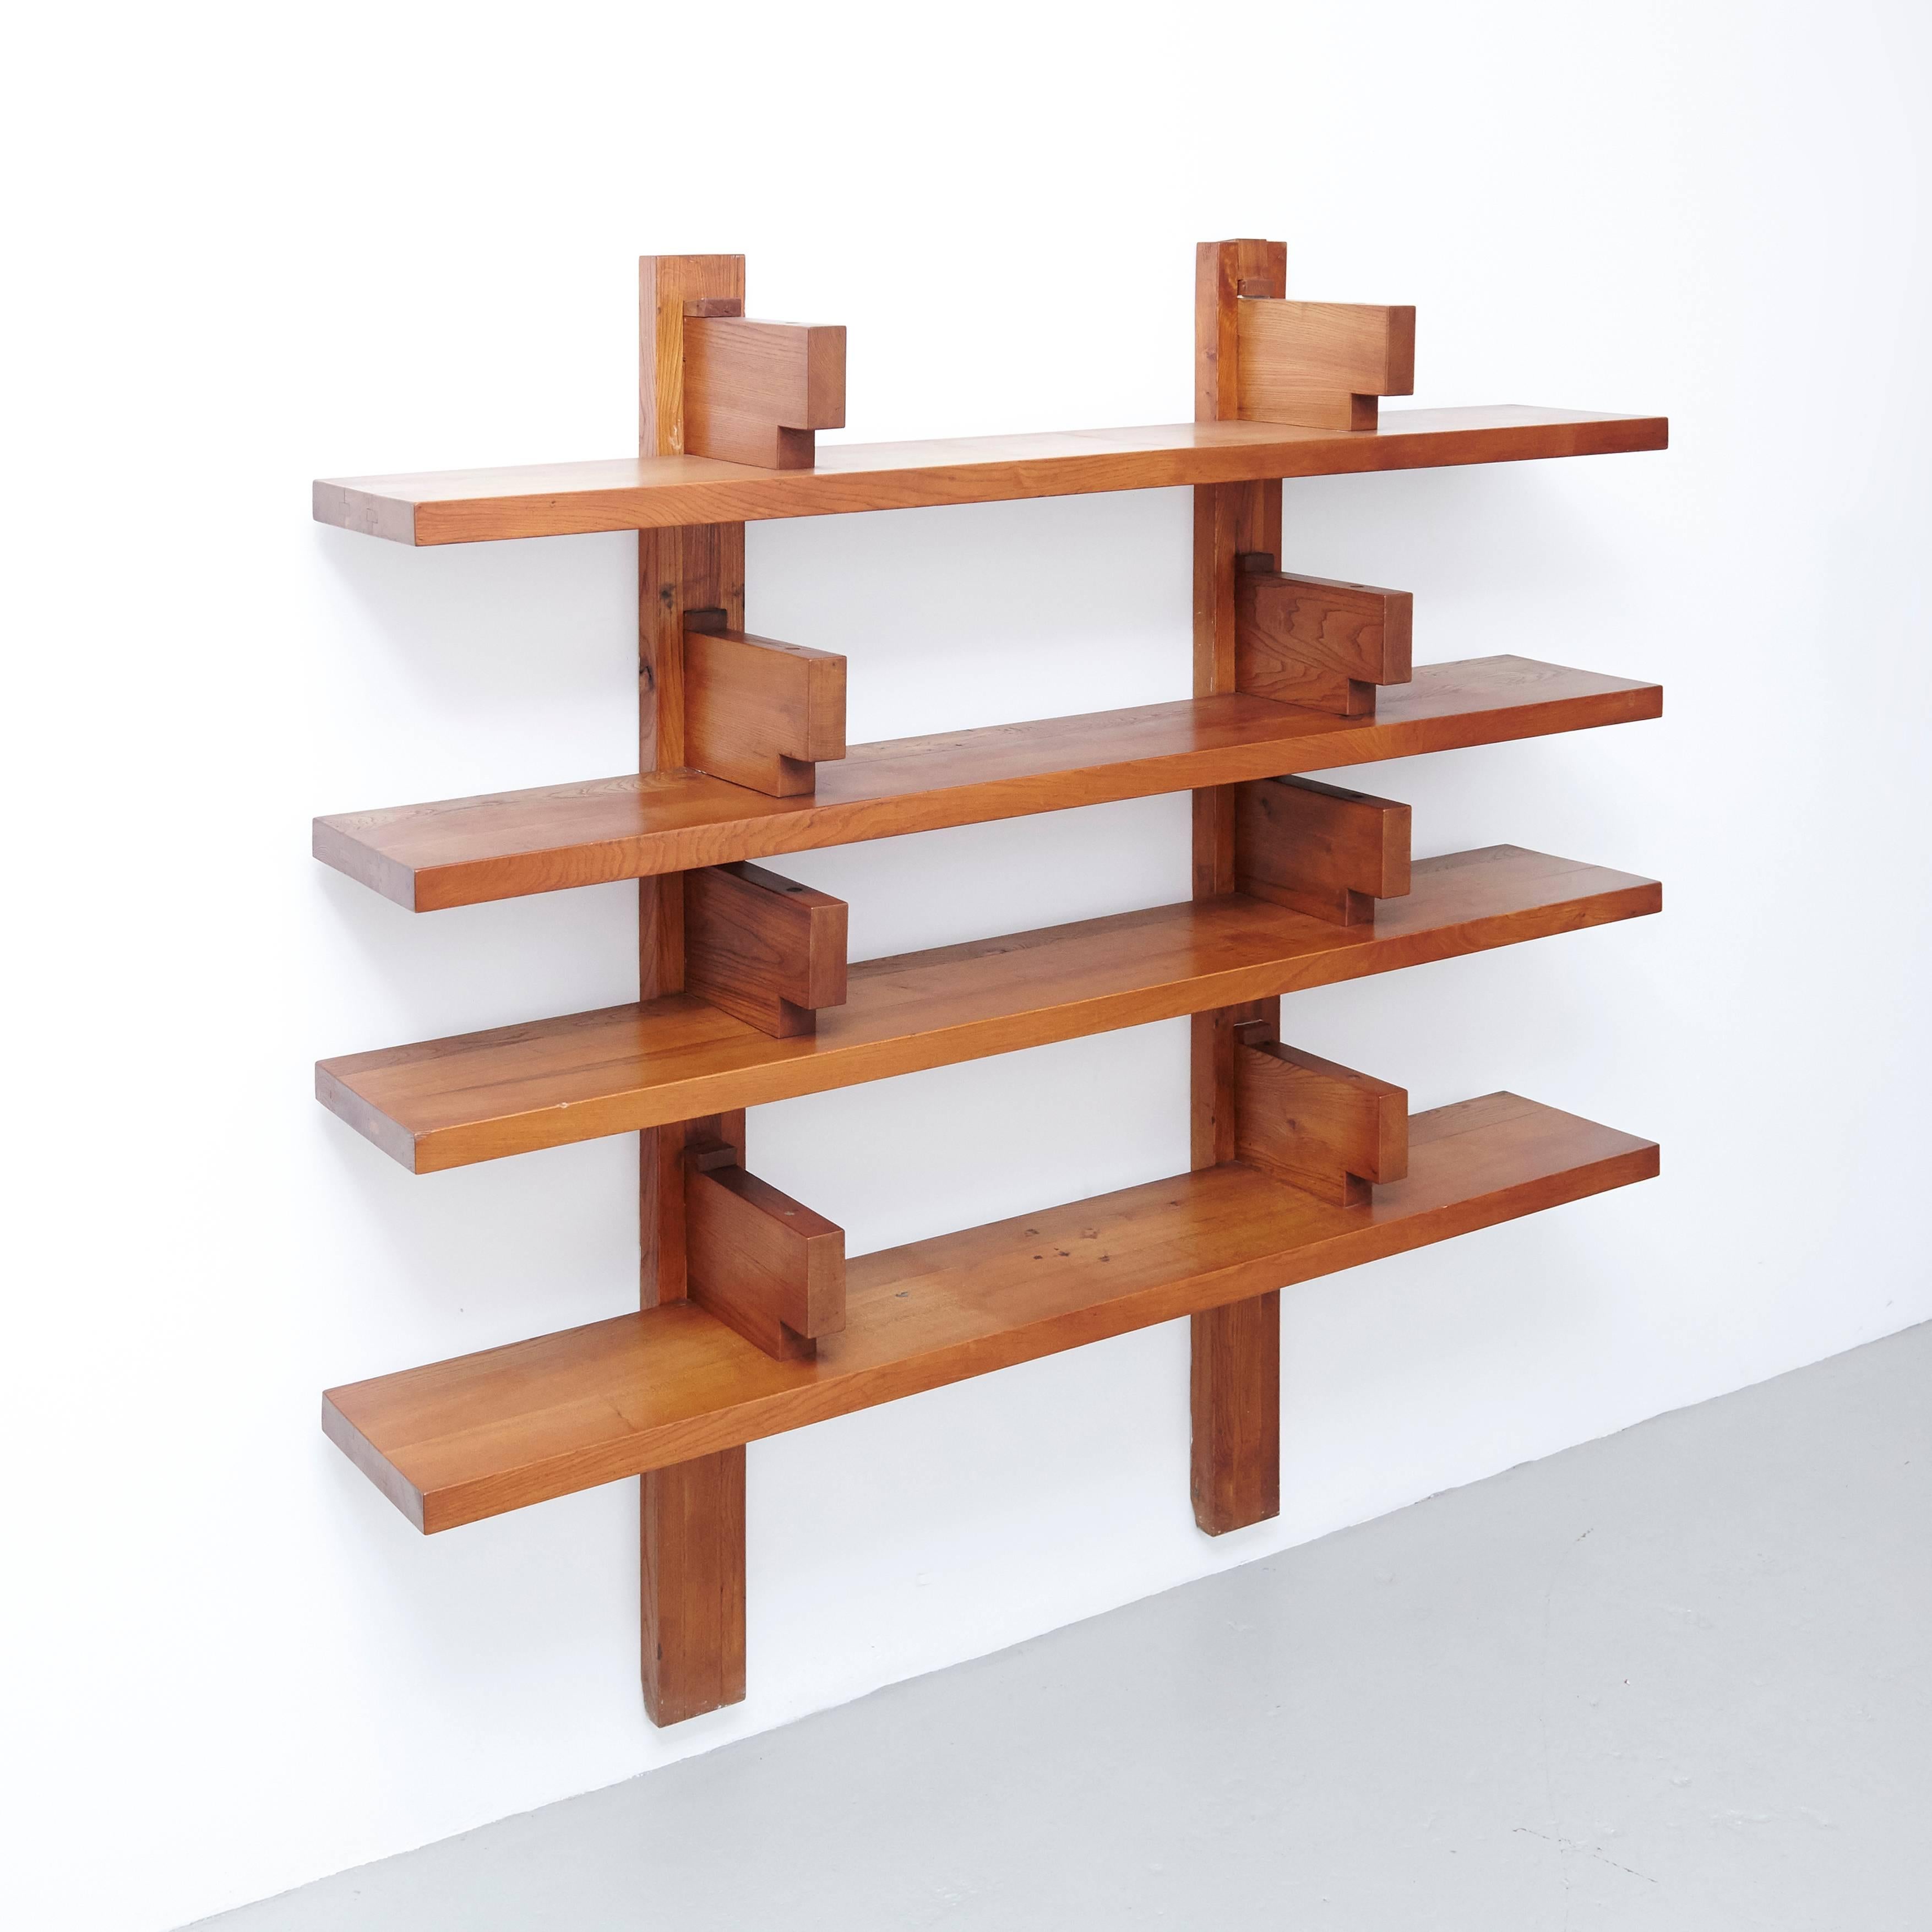 Wall-mounted book shelves designed by Pierre Chapo, circa 1960 in France.

elmwood

In original condition, with wear consistent with age and use, preserving a beautiful patina.

The lower back part of the wood structure has some looses on the